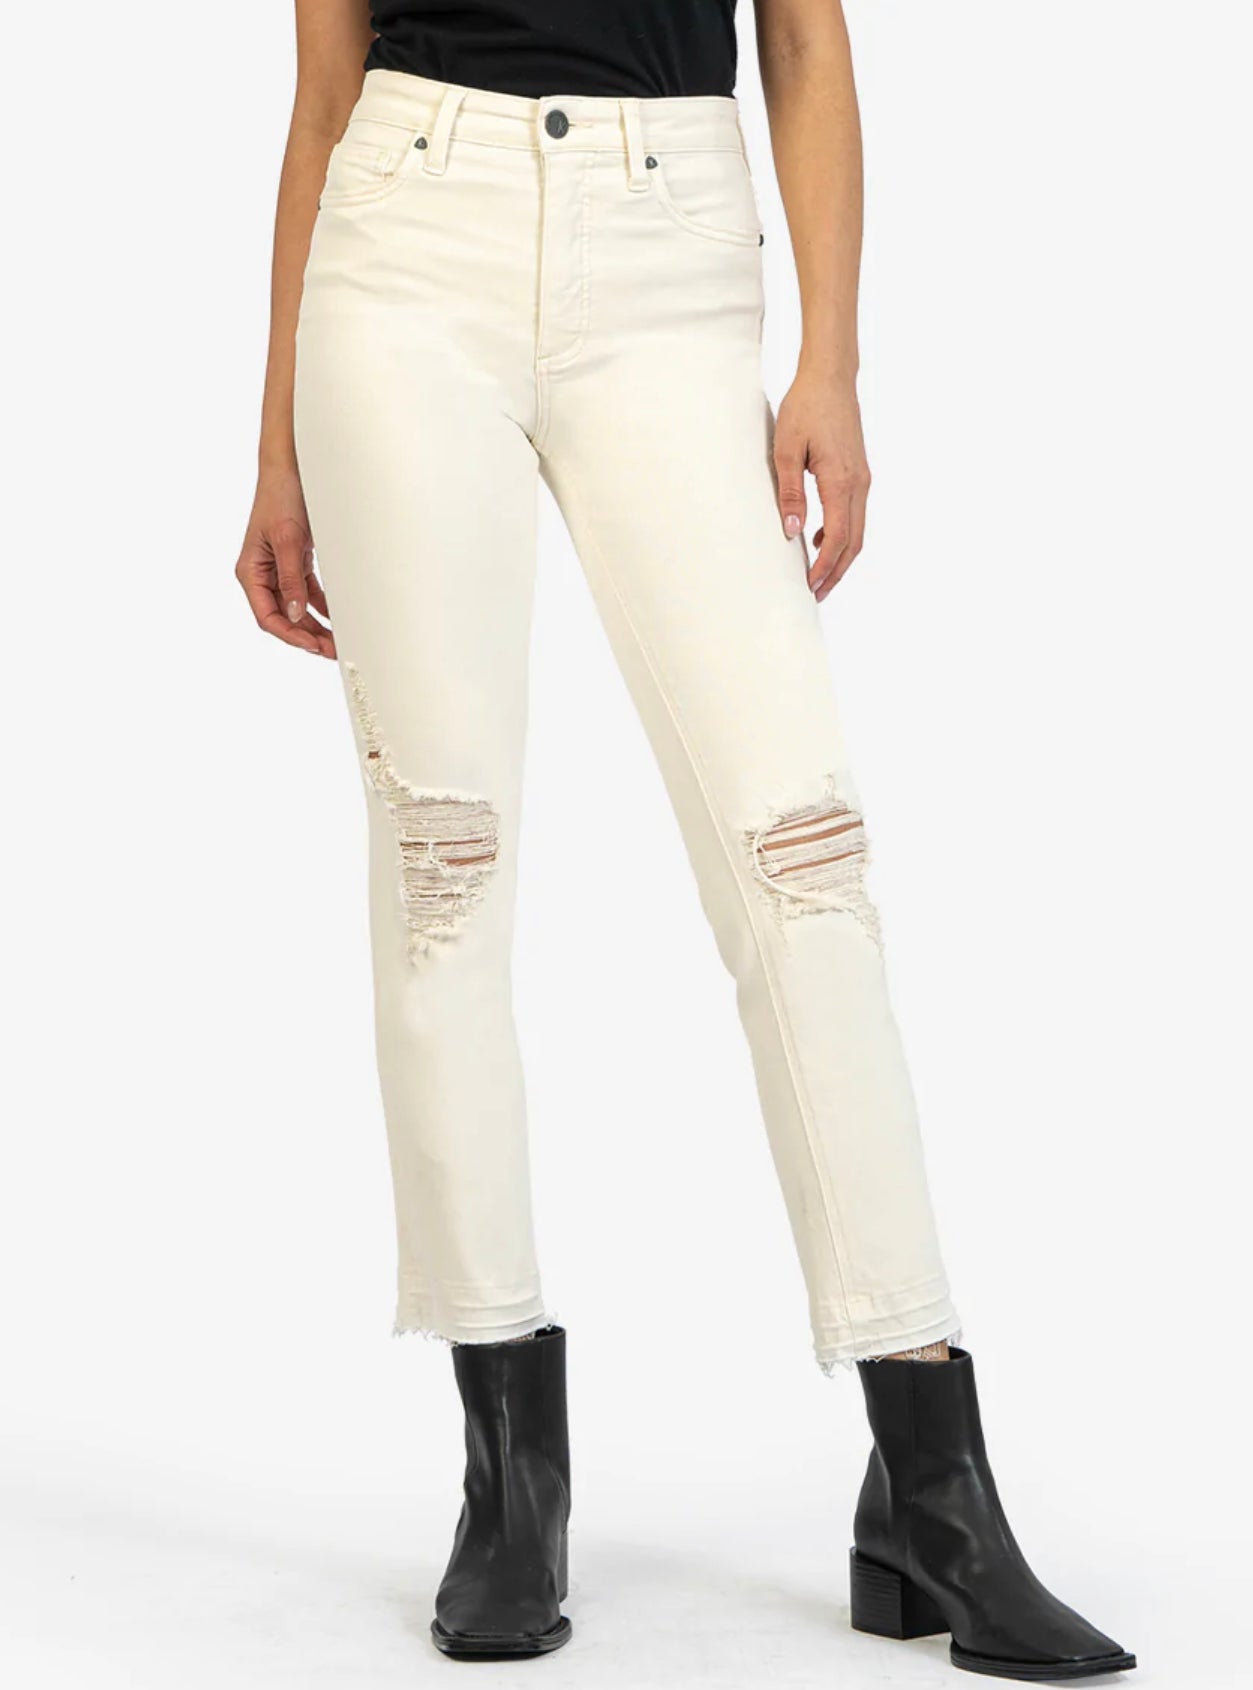 Kut from the Kloth Rachael High Rise Fab Ab Mom Jeans in Ecru Wash